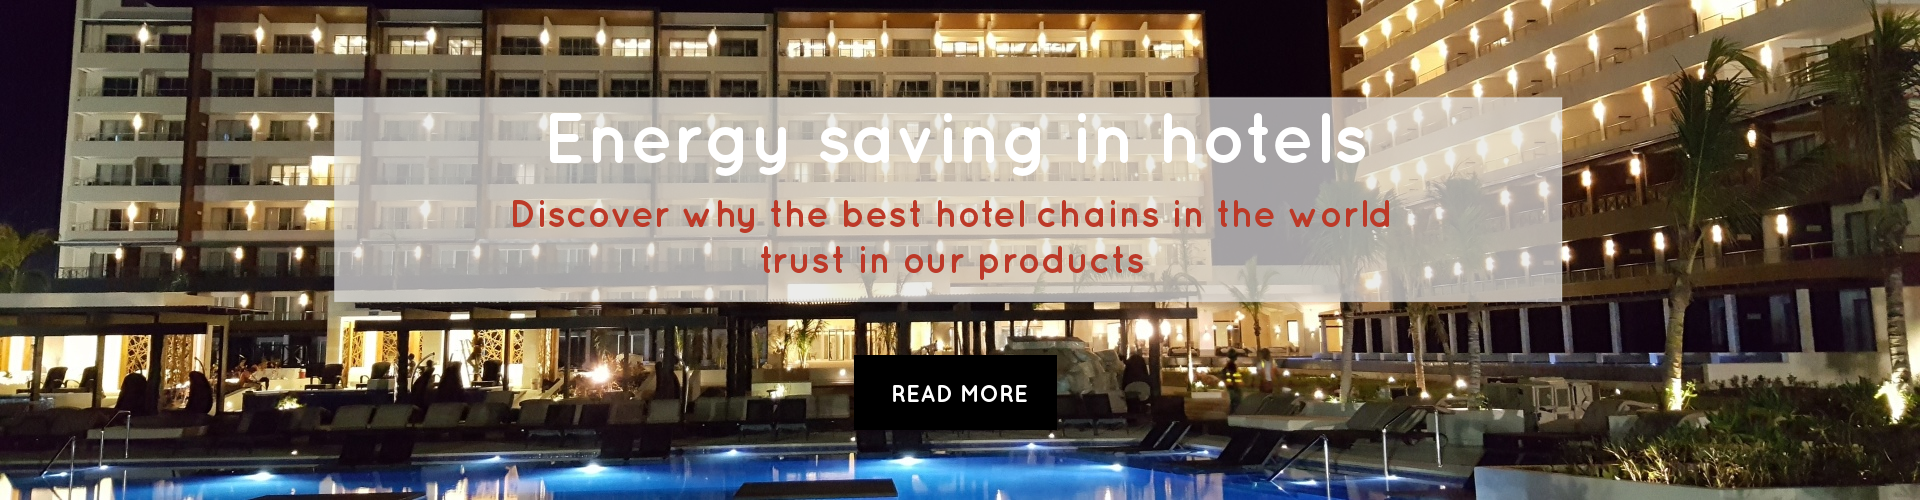 Energy saving in hotels discover why the best hotel chains in the world trust in our products